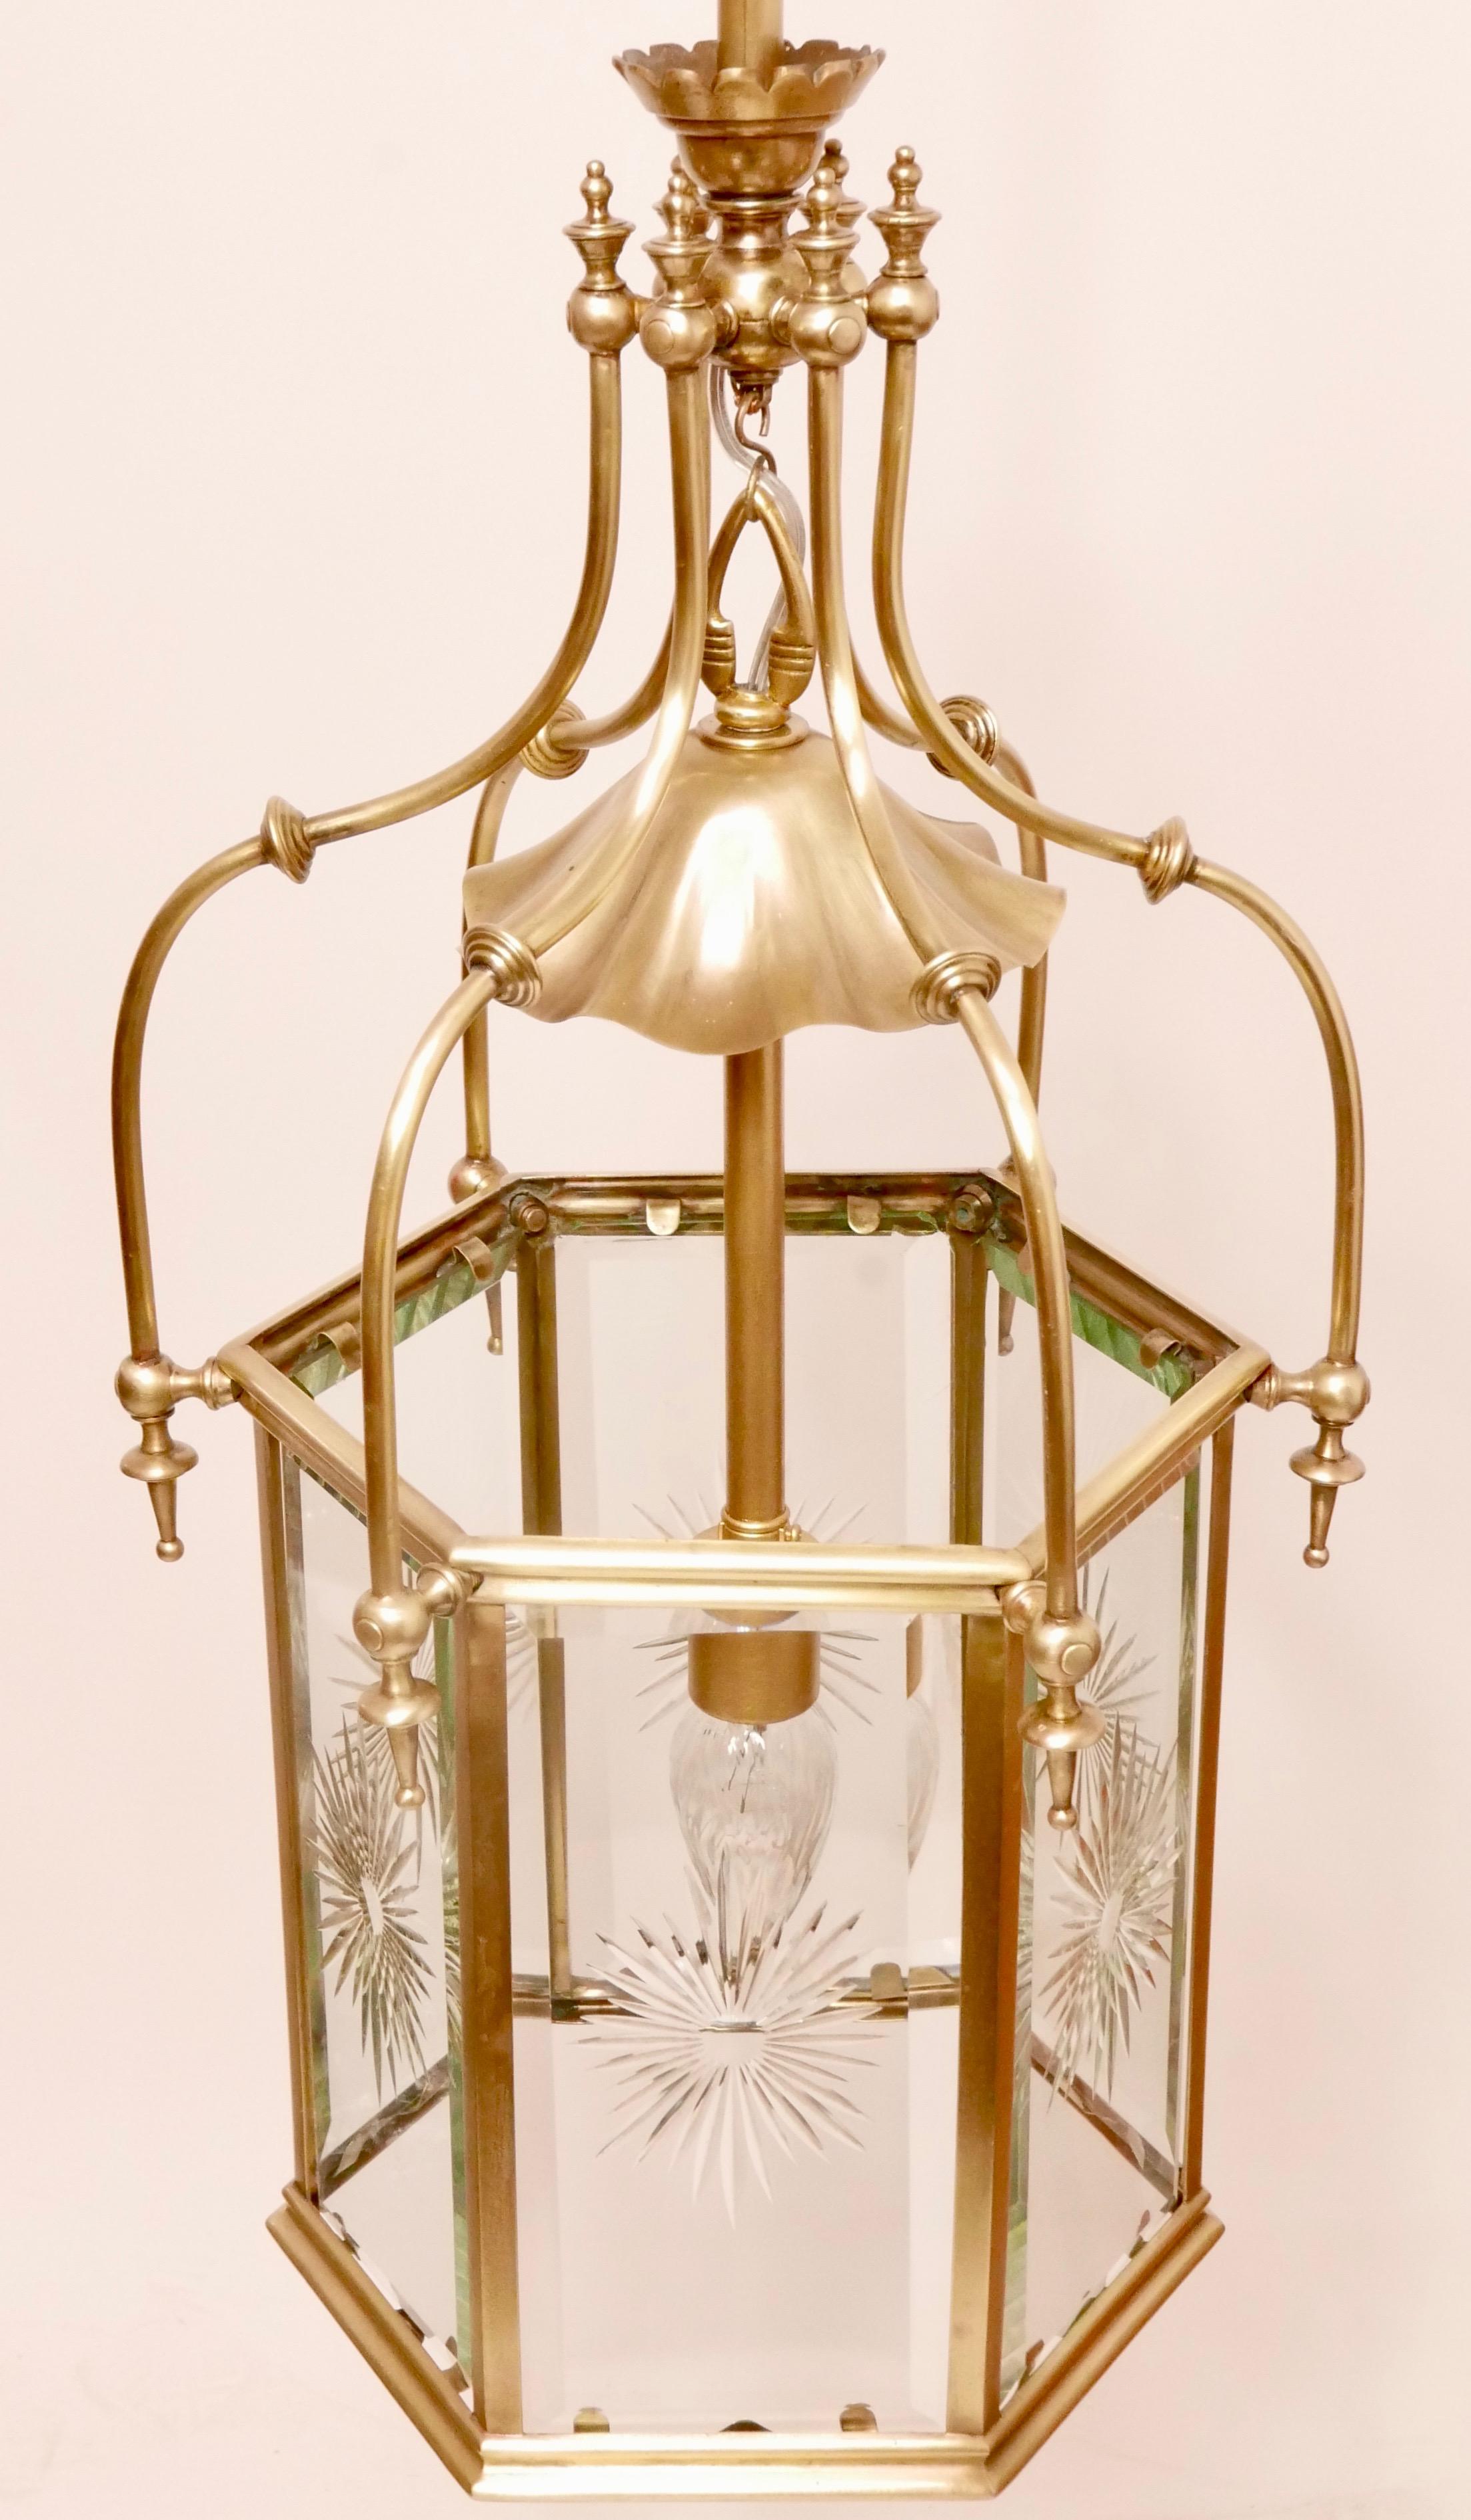 Exceptional 19th Century Brass & Cut Glass Hexagon Shaped Entry or Hall Lantern In Good Condition For Sale In San Francisco, CA